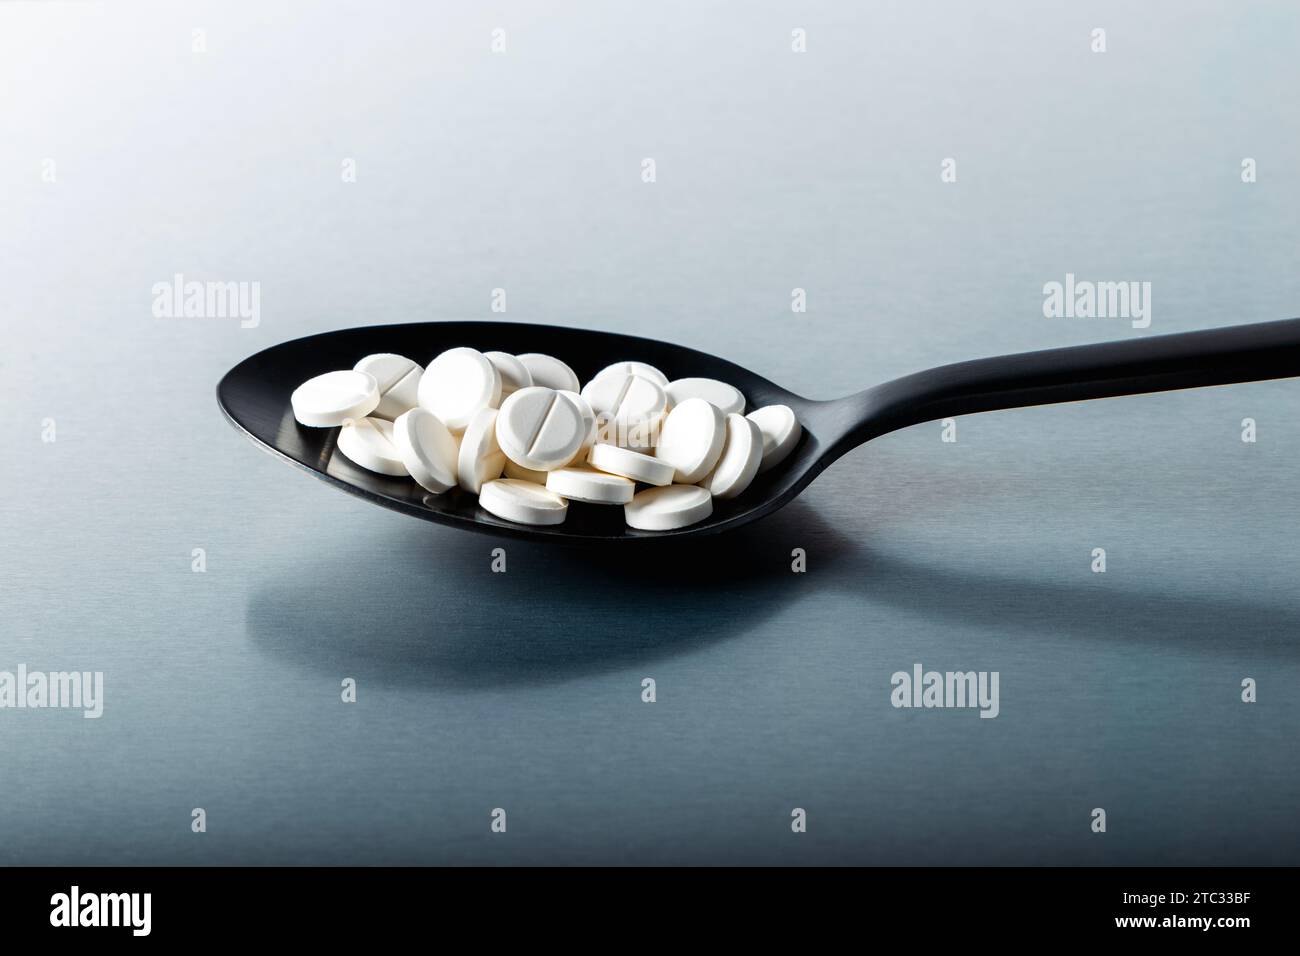 White pill tablets on a black spoon Stock Photo